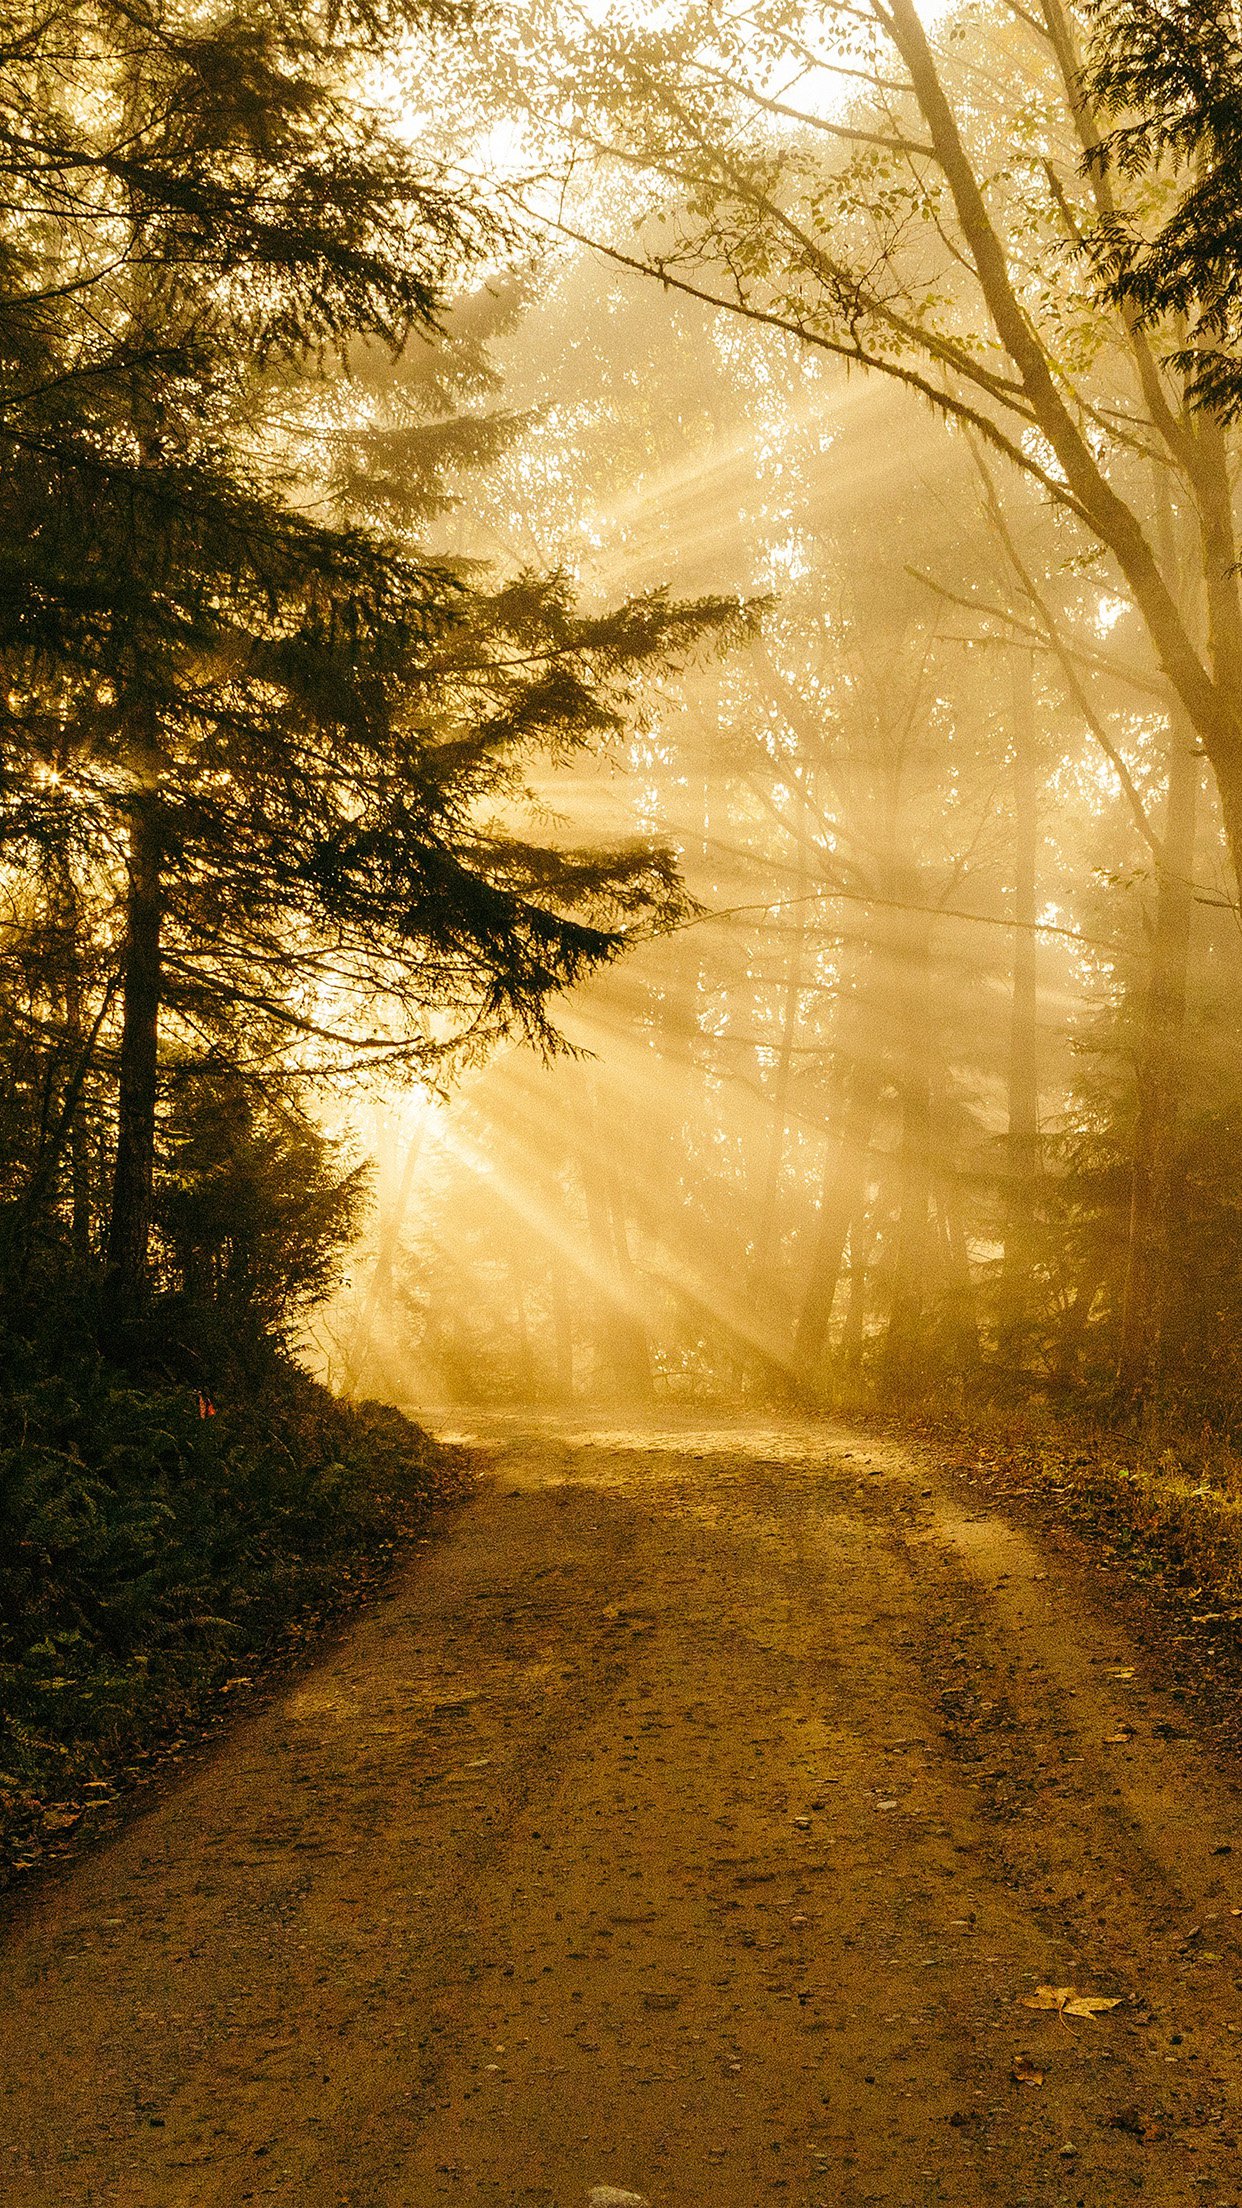 Sunny Road Wood Forest Light Tree Nature Gold Android - HD Wallpaper 